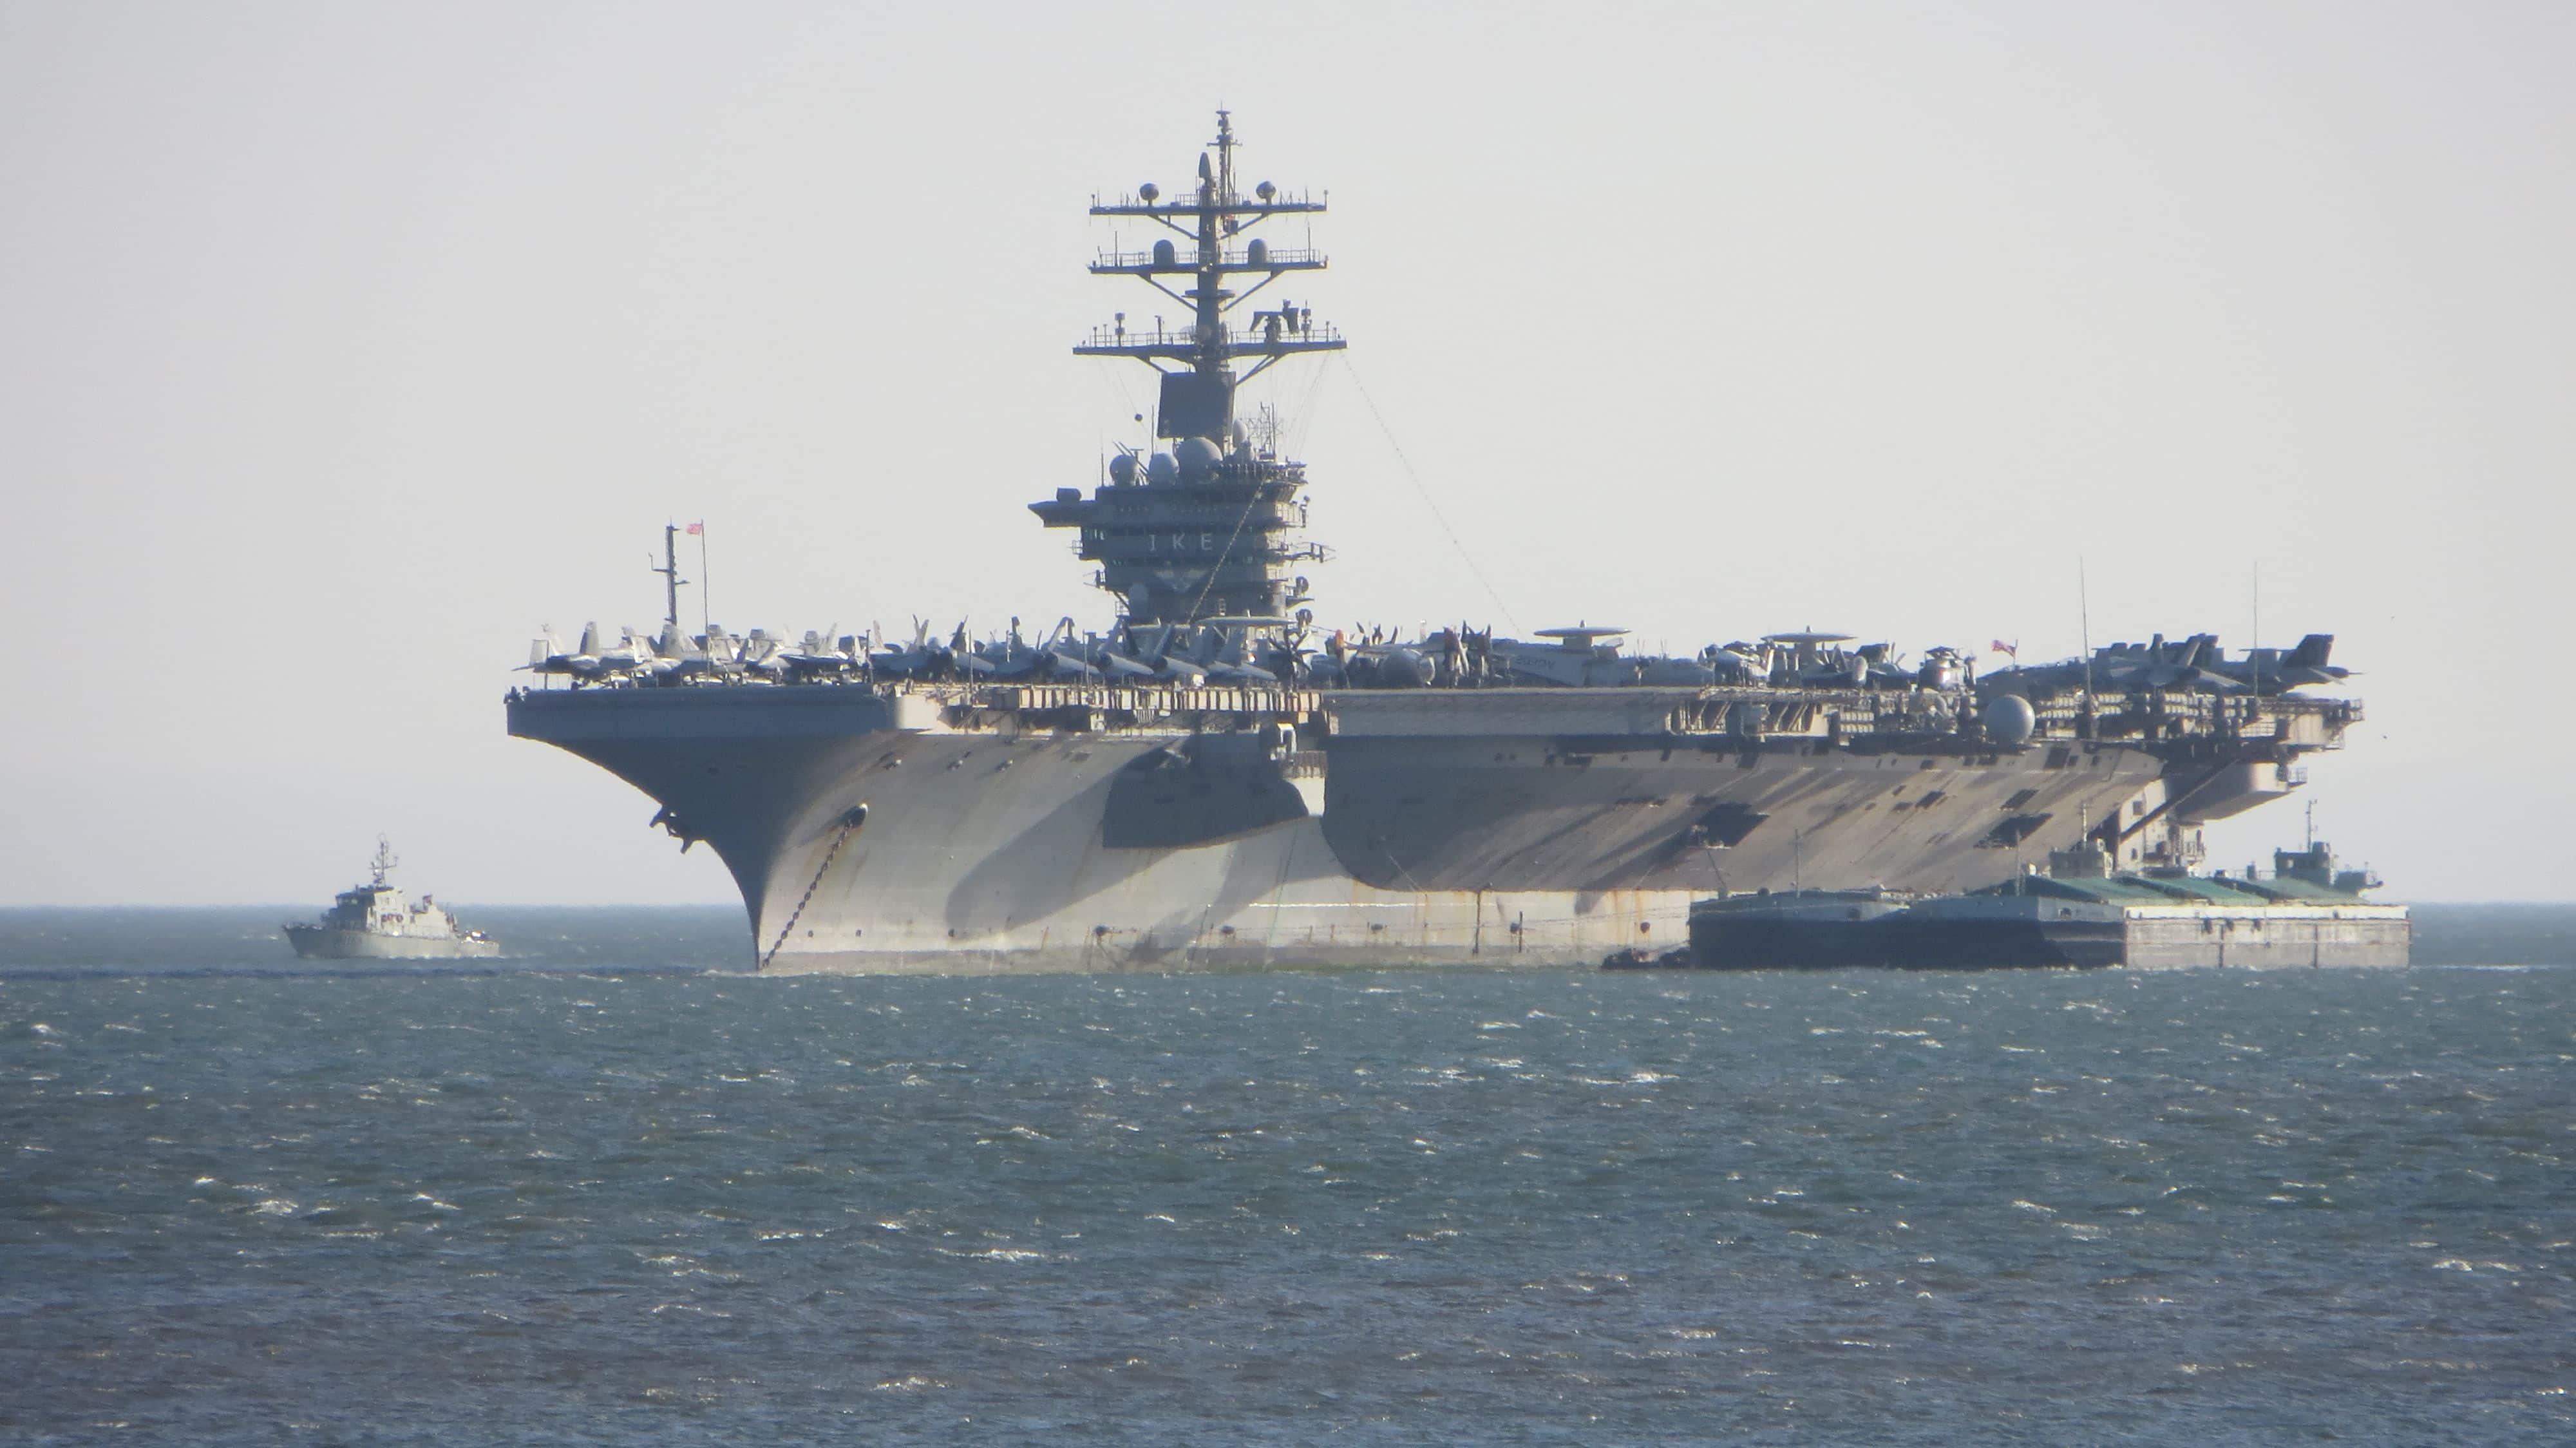 Lisbon / Portugal - June 22, 2013: USS Dwight D. Eisenhower (CVN-69) (known informally as "Ike") anchored on the entrance of the Tagus river estuary, Lisbon, Portugal.